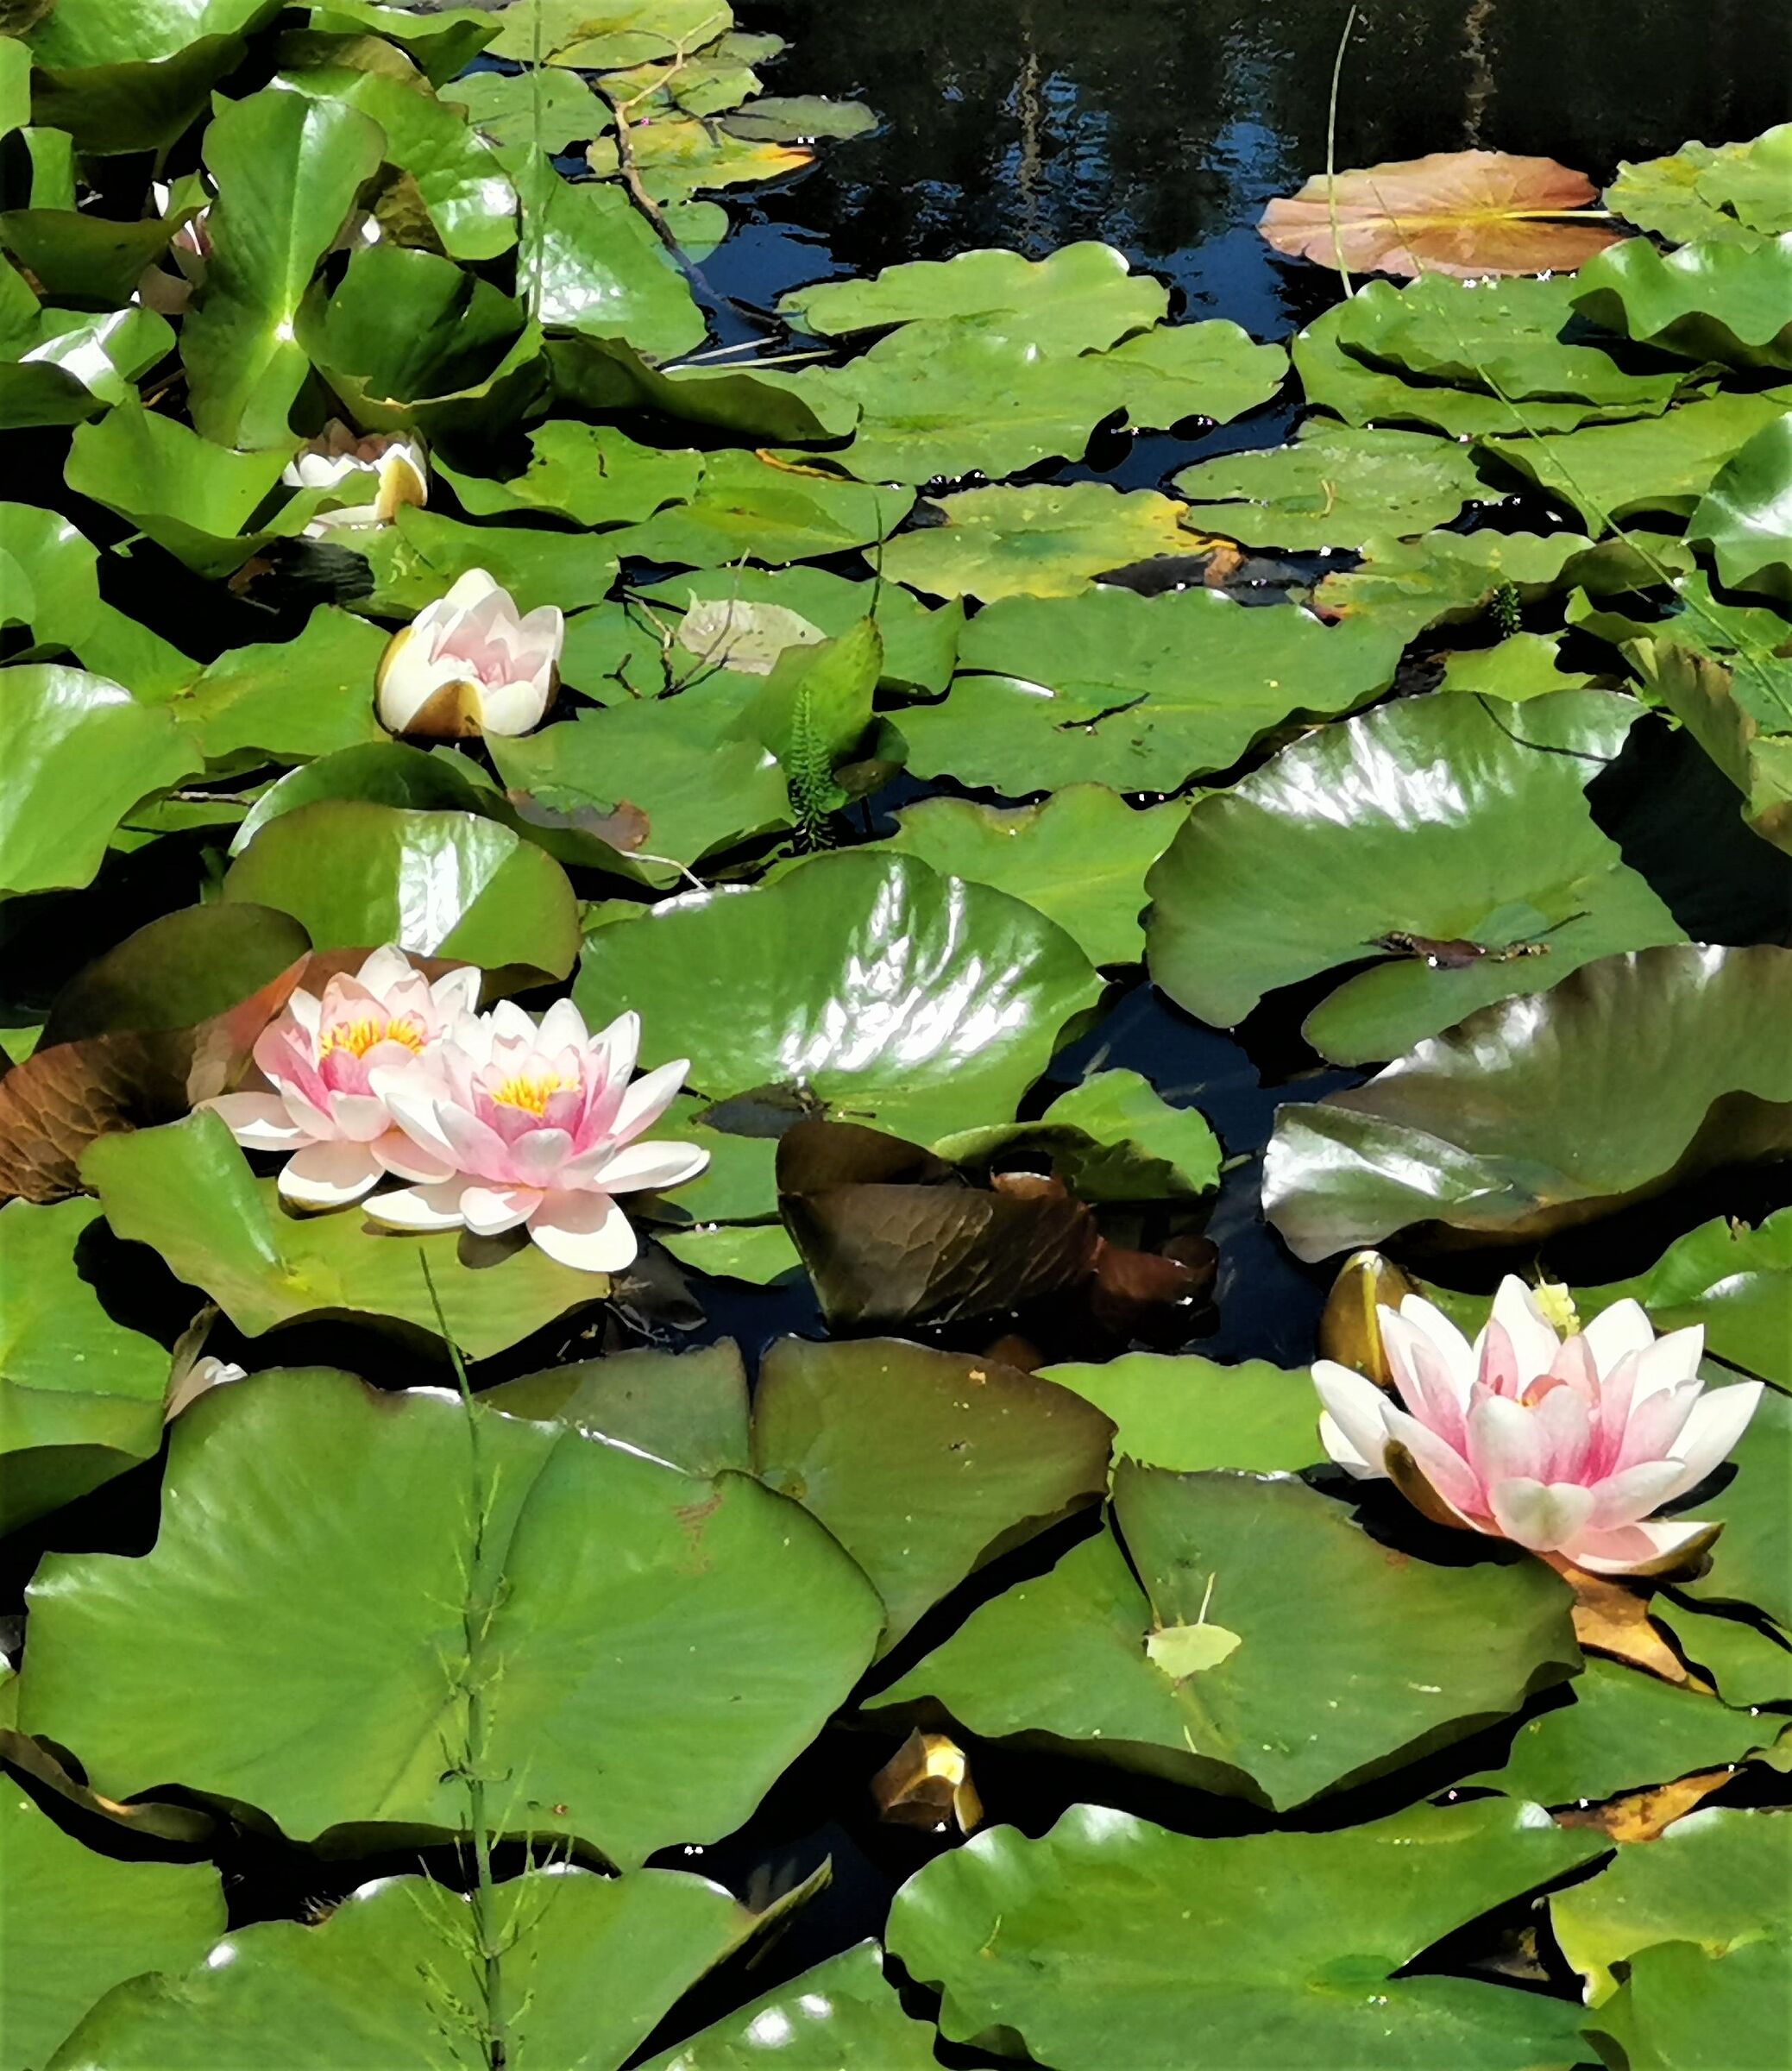 The water lilies of Maria Sales...